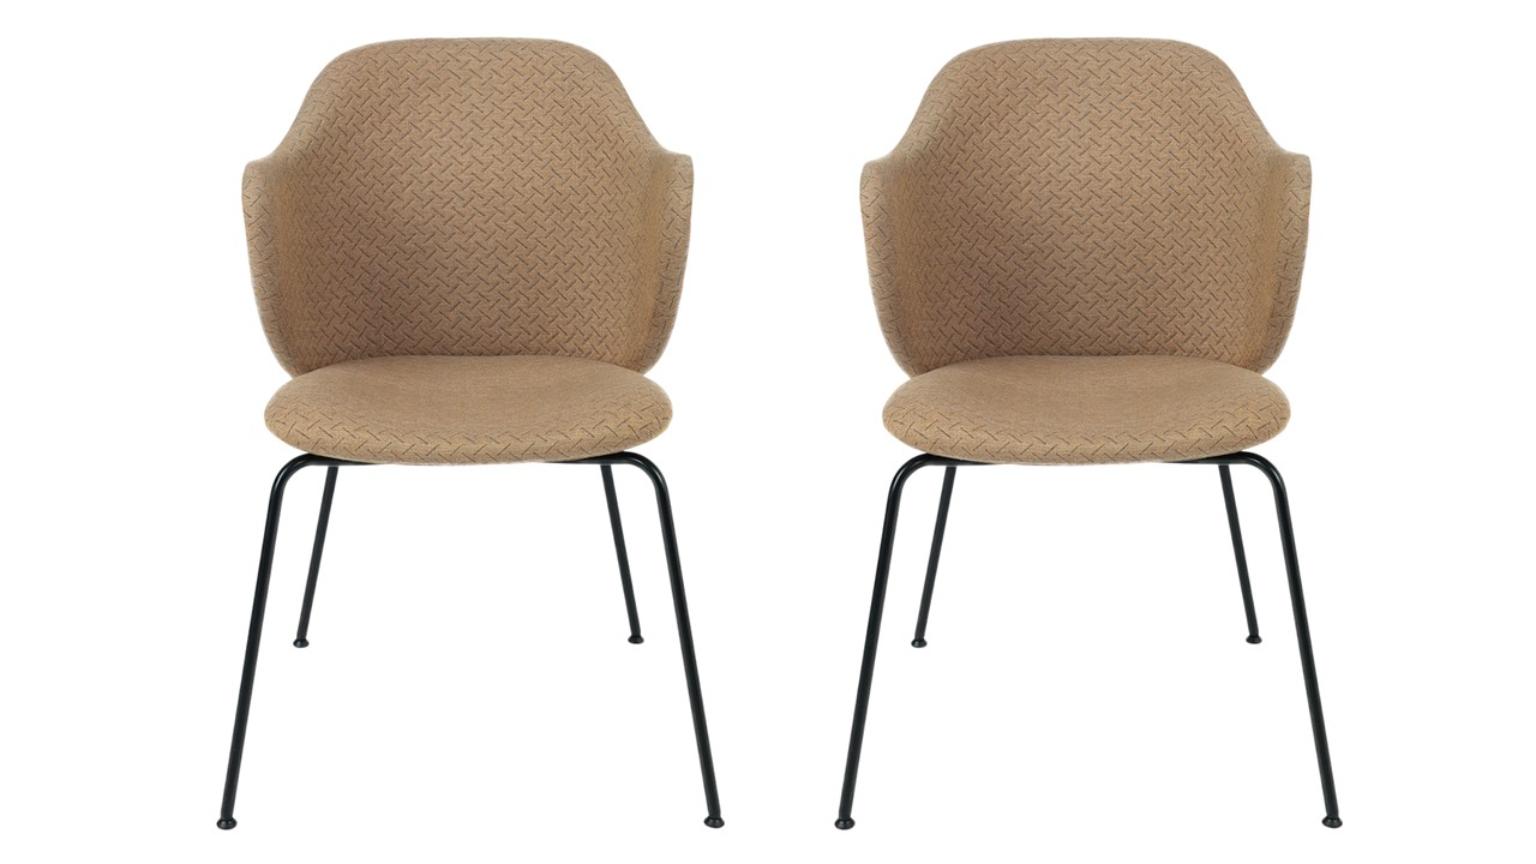 Set of 2 brown Jupiter Lassen chairs by Lassen.
Dimensions: W 58 x D 60 x H 88 cm.
Materials: Textile.

The Lassen Chair by Flemming Lassen, Magnus Sangild and Marianne Viktor was launched in 2018 as an ode to Flemming Lassen’s uncompromising